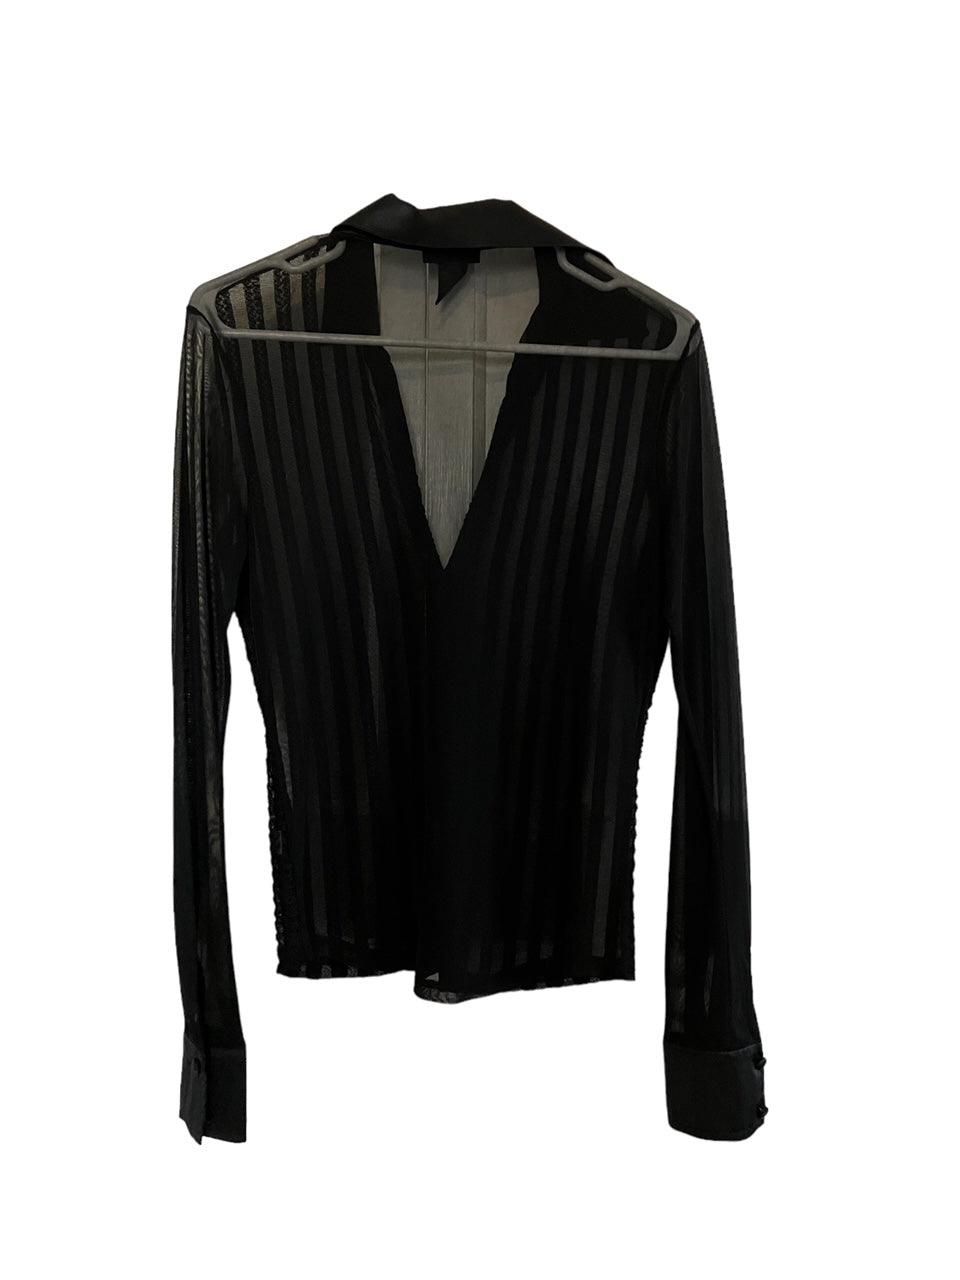 Black Sheer Lace Striped Blouse